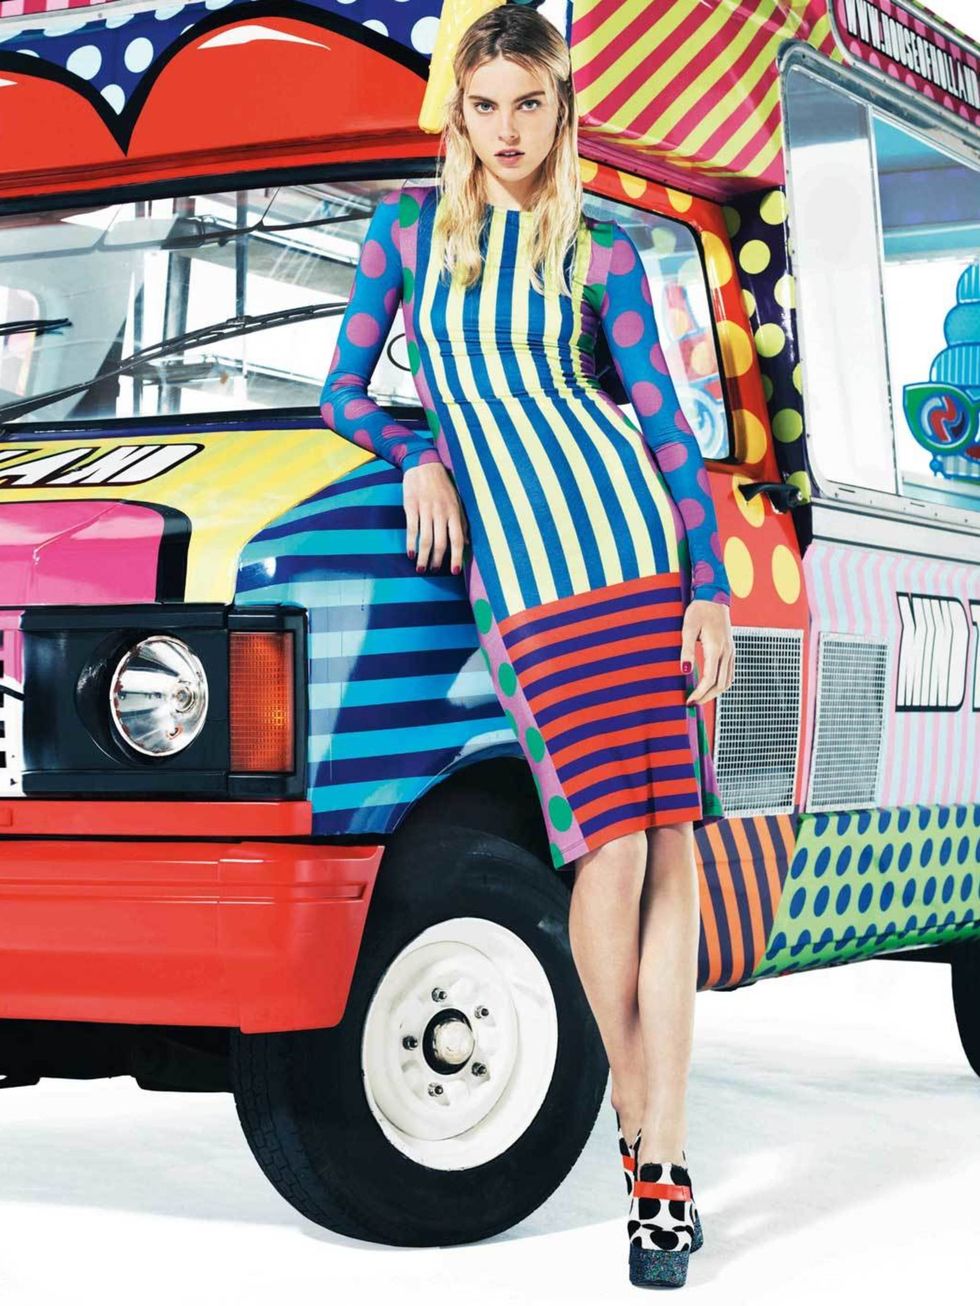 <p><strong>Henry Hollands Mr Quiffy flagship</strong></p><p>Catch the worlds most fashionable ice-cream van this Saturday at Seven Dials. <a href="http://www.elleuk.com/fashion/news/henry-holland-high-summer-ice-cream-van-mr-quiffys">House of Holland</a